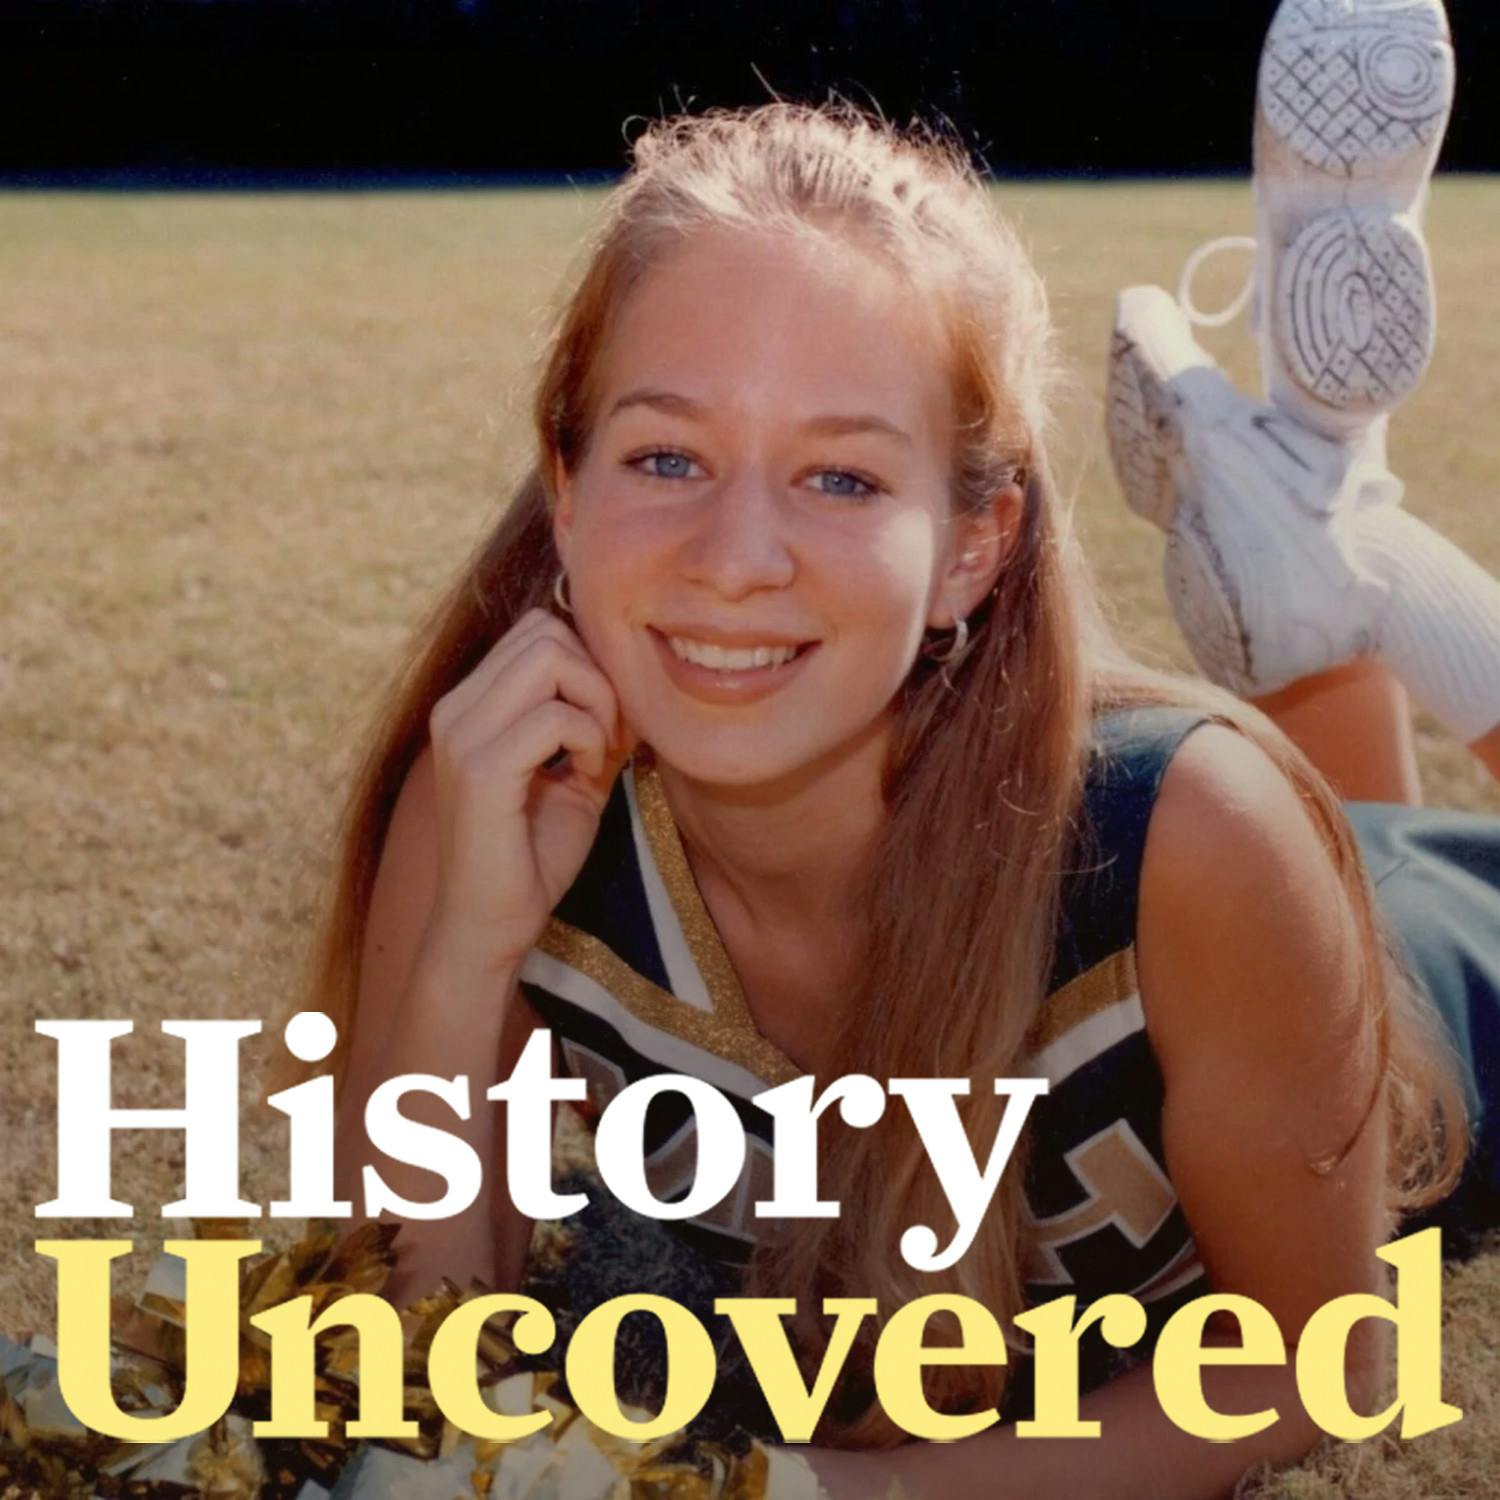 The Chilling Story Behind The Disappearance Of Natalee Holloway